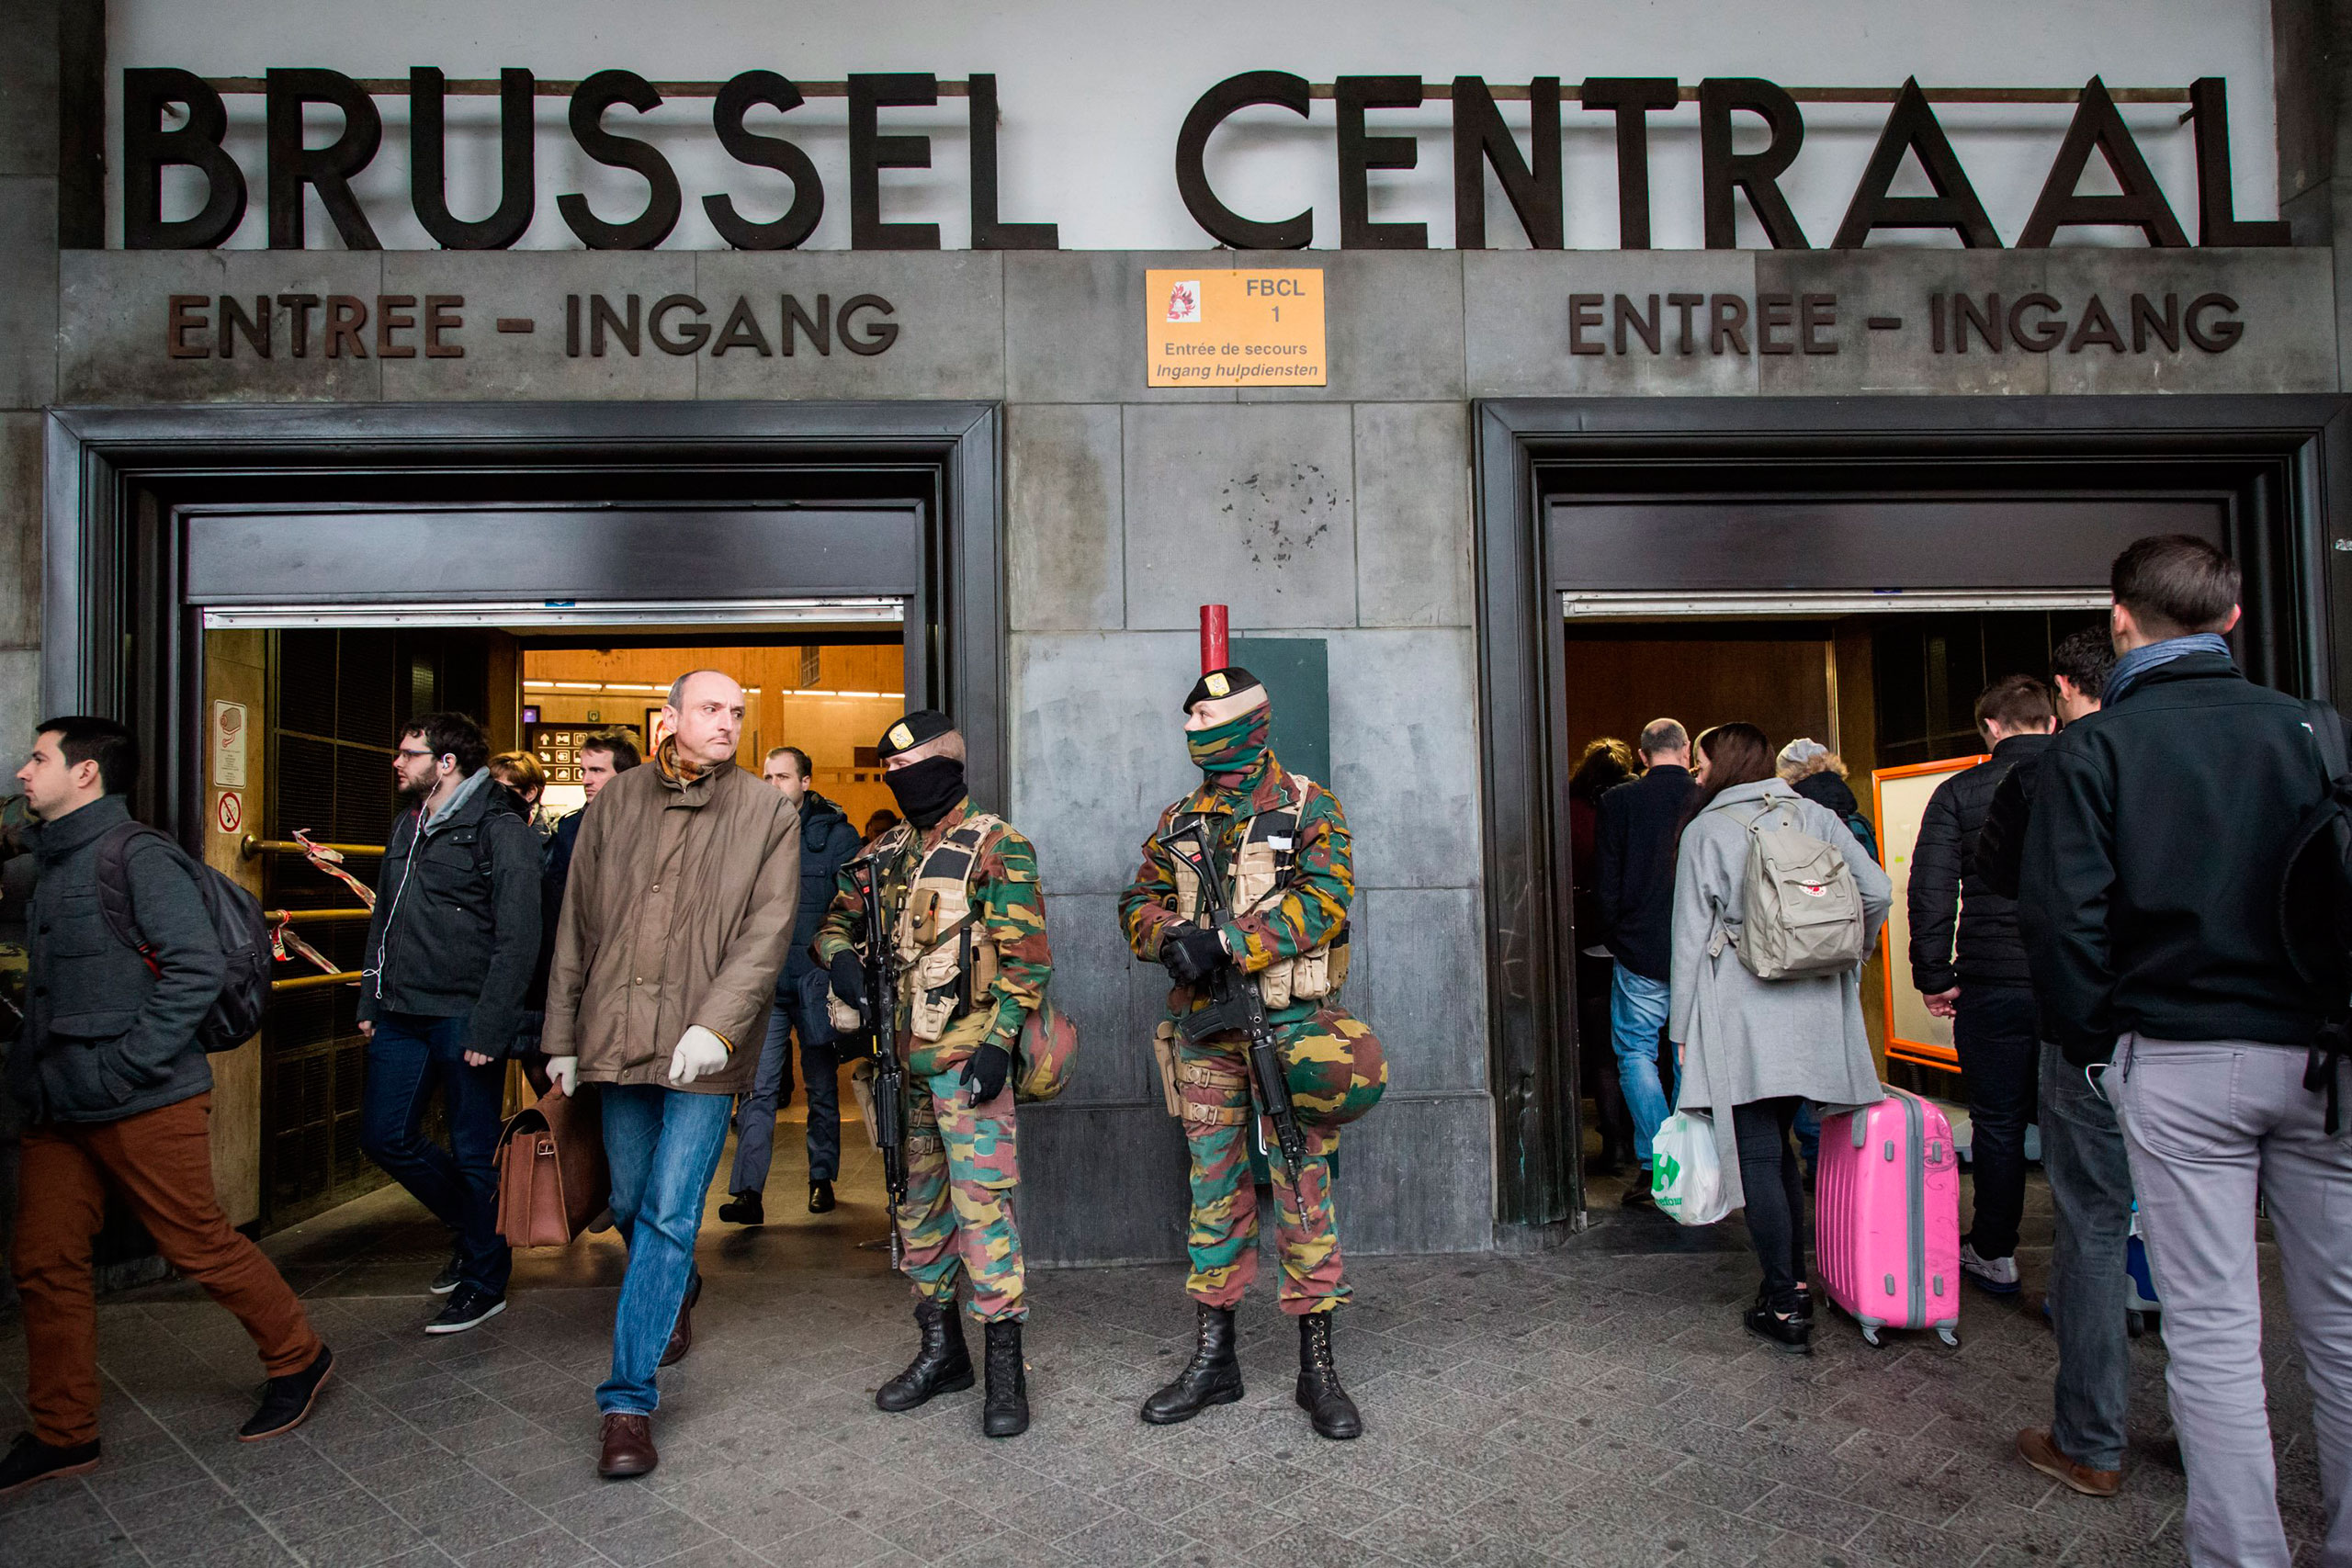 Soldiers stand guard at the entrance of Brussels Central Station, on March 23, 2016, one day after the terrorist attacks killed at least 31 people (Aurore Belot—AFP/Getty Images)